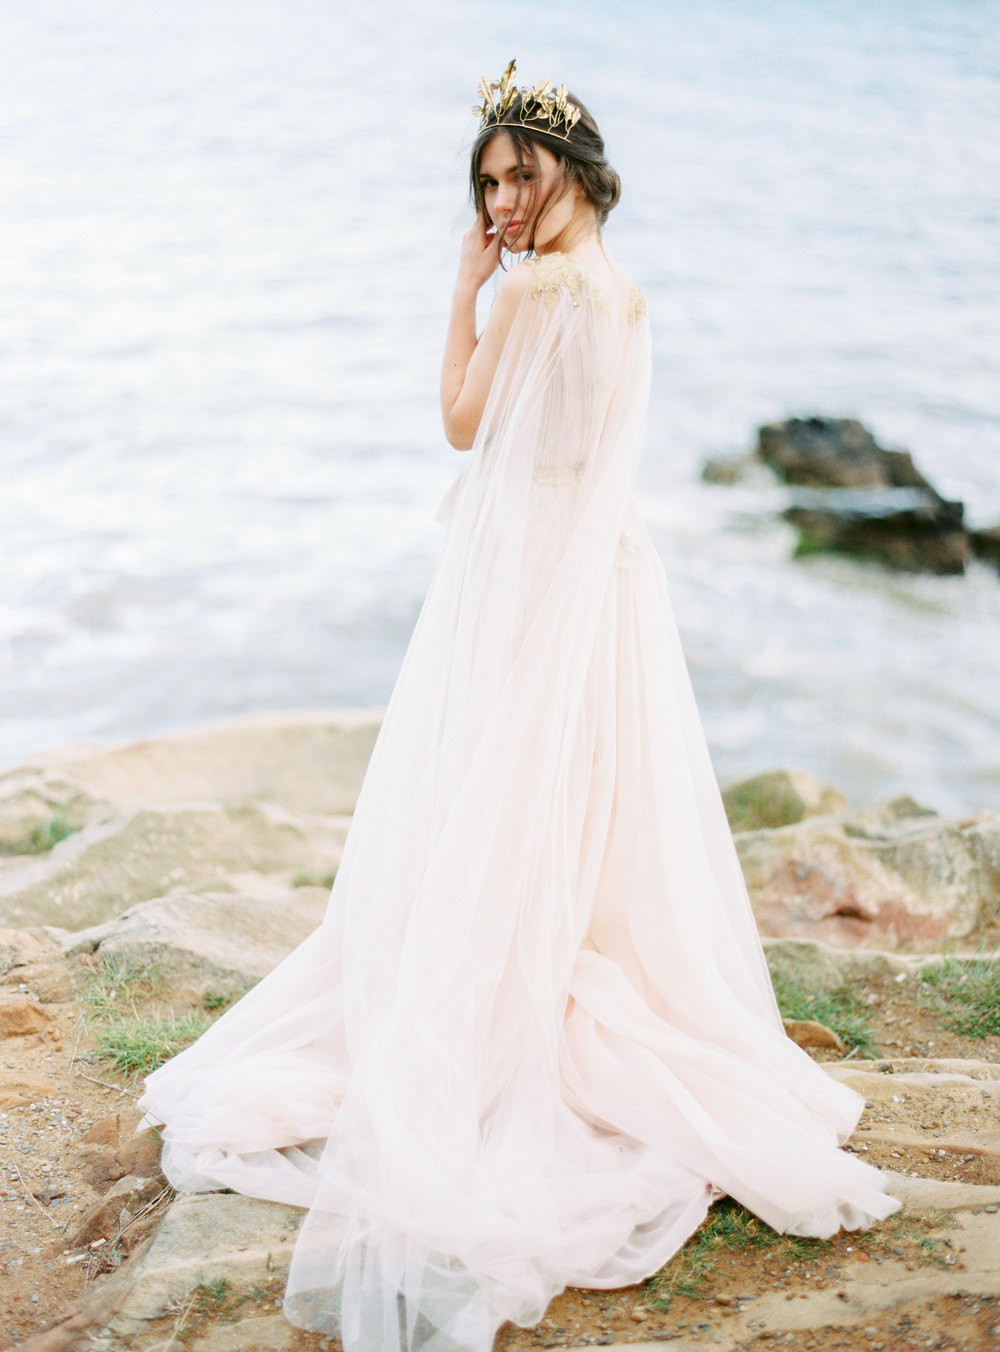 Ethereal Wedding Gowns
 20 Romantic Ethereal Wedding Dresses